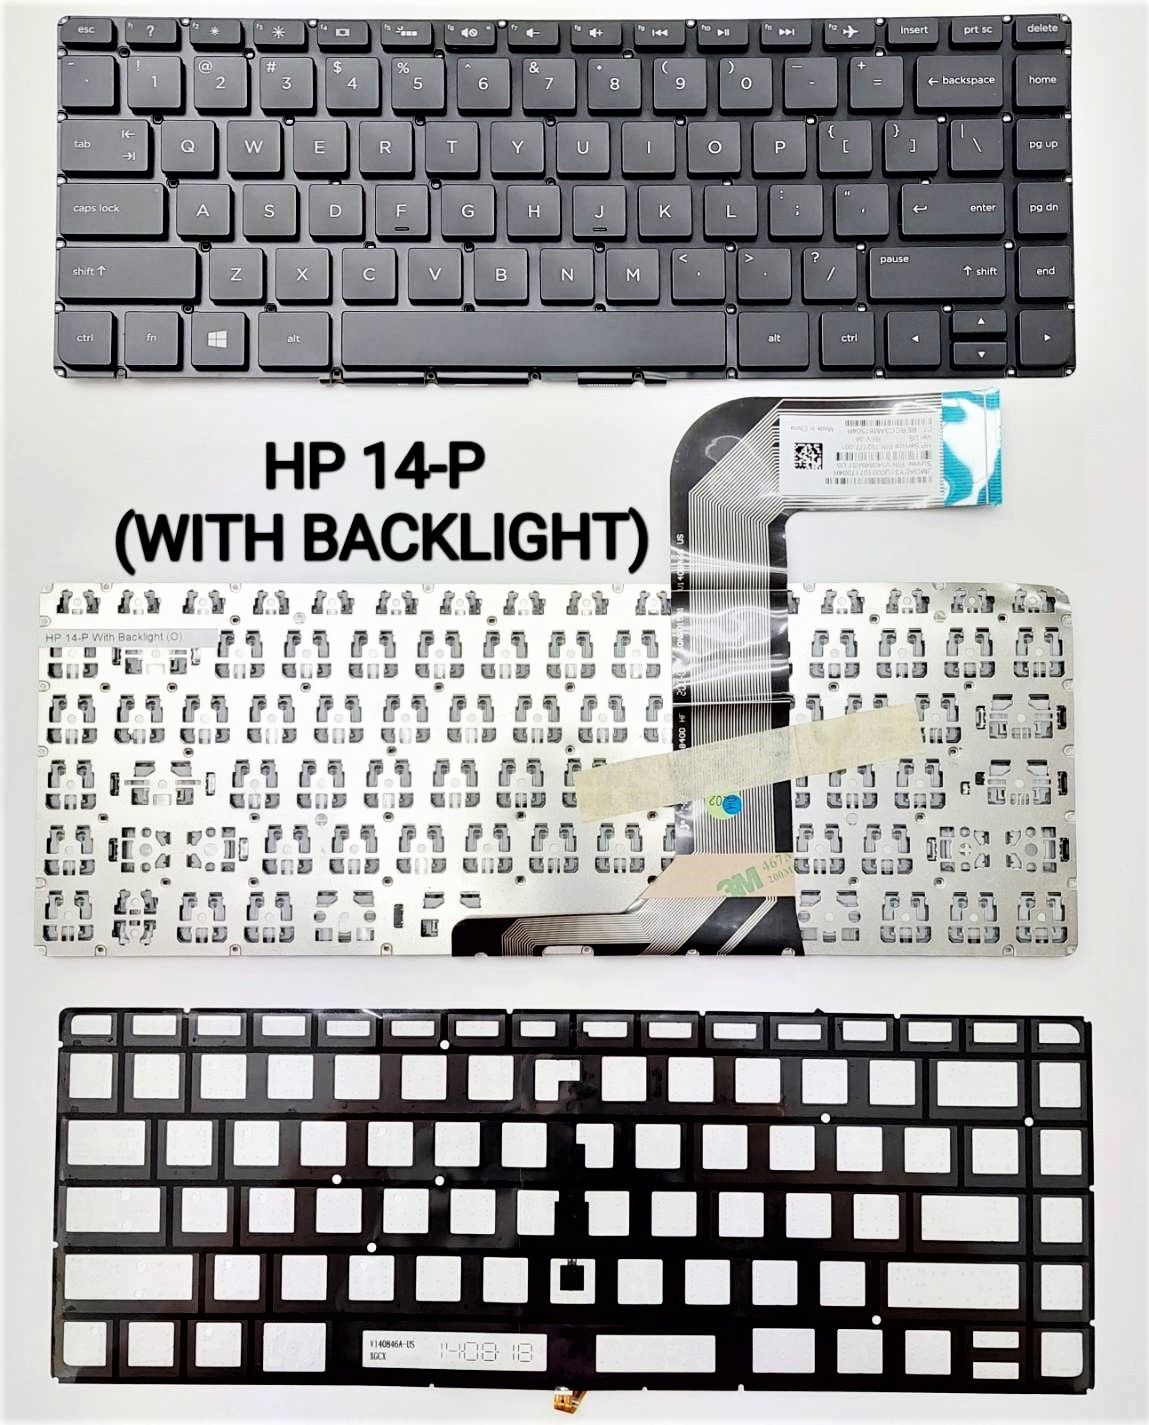 HP 14-P WITH BACKLIGHT KEYBOARD